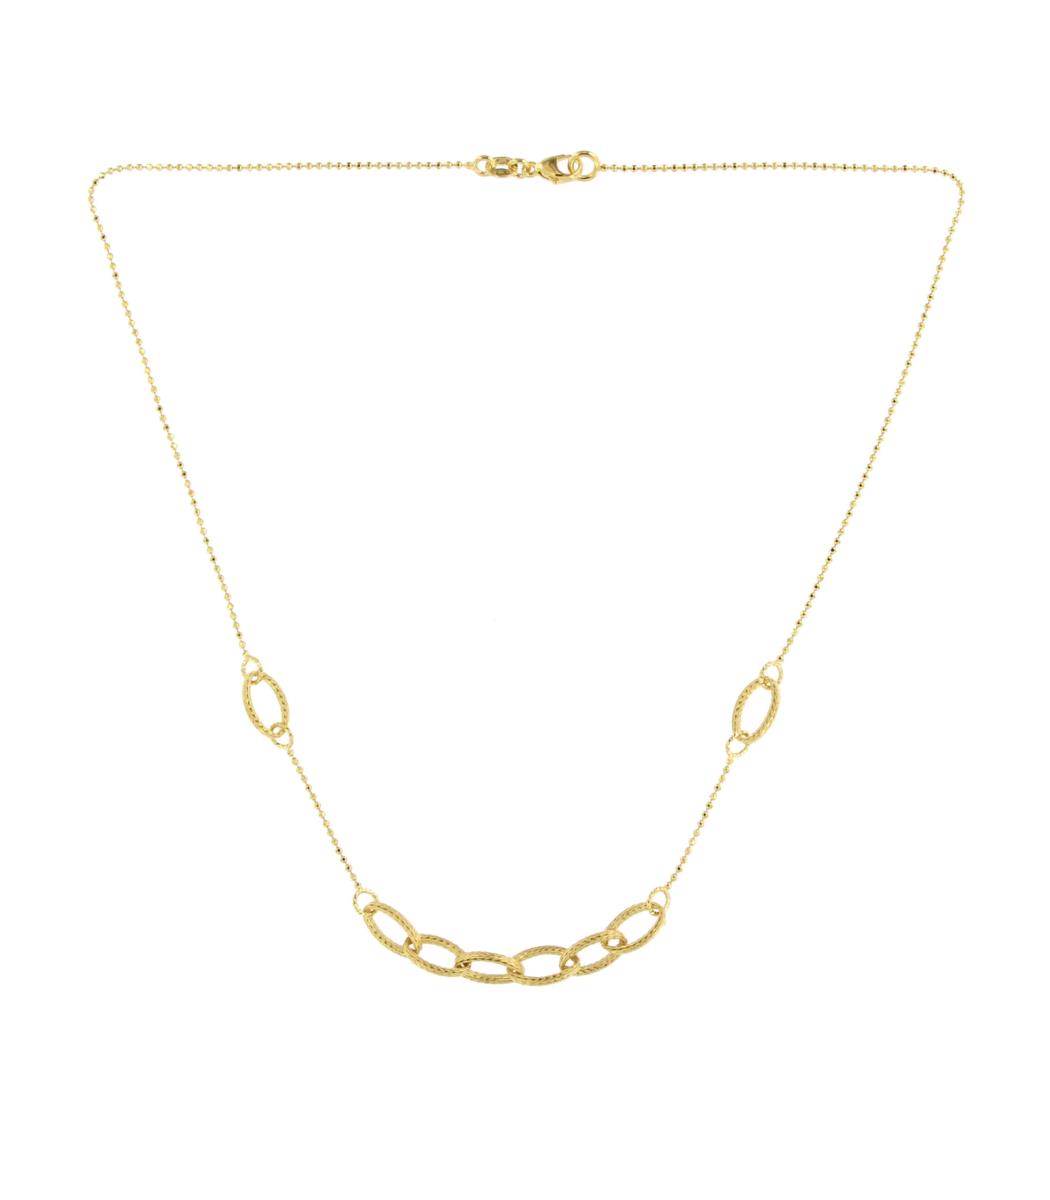 14K Yellow Gold Texture Links With High Polish and Diamond Cut Beads Necklace, 17"